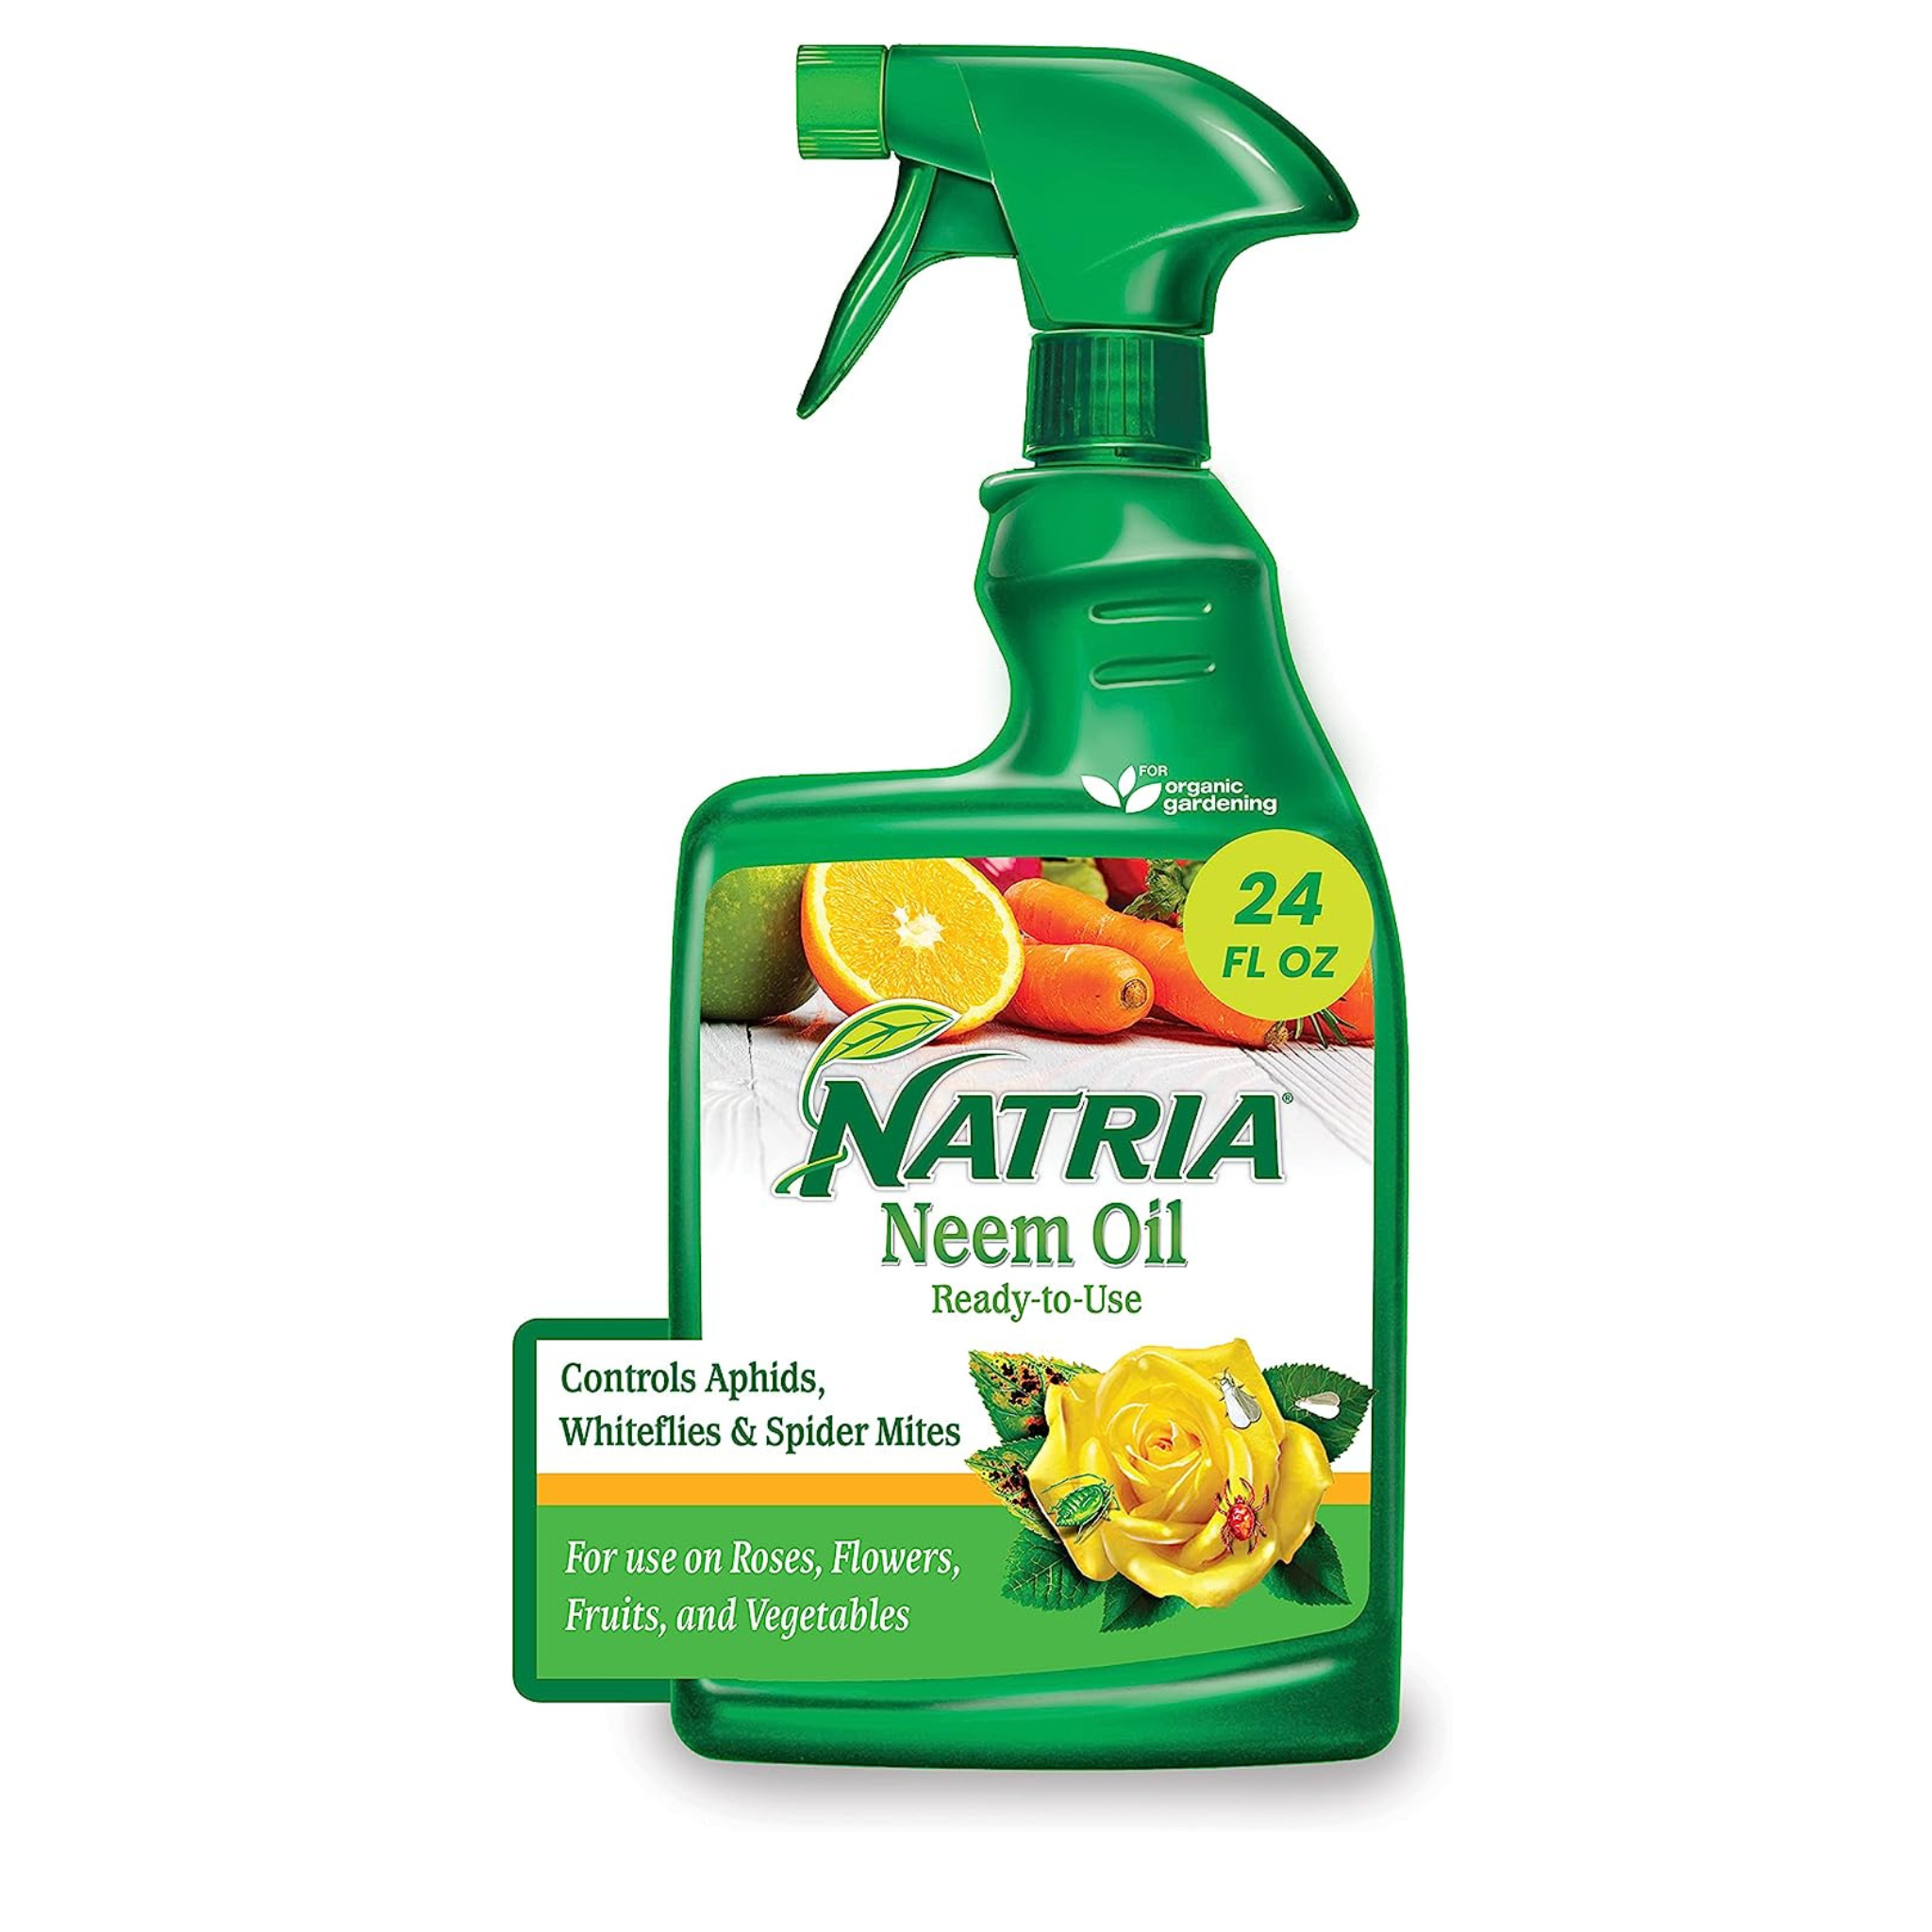 24oz. Natria Ready-to-Use Neem Oil Spray for Plants/Insects